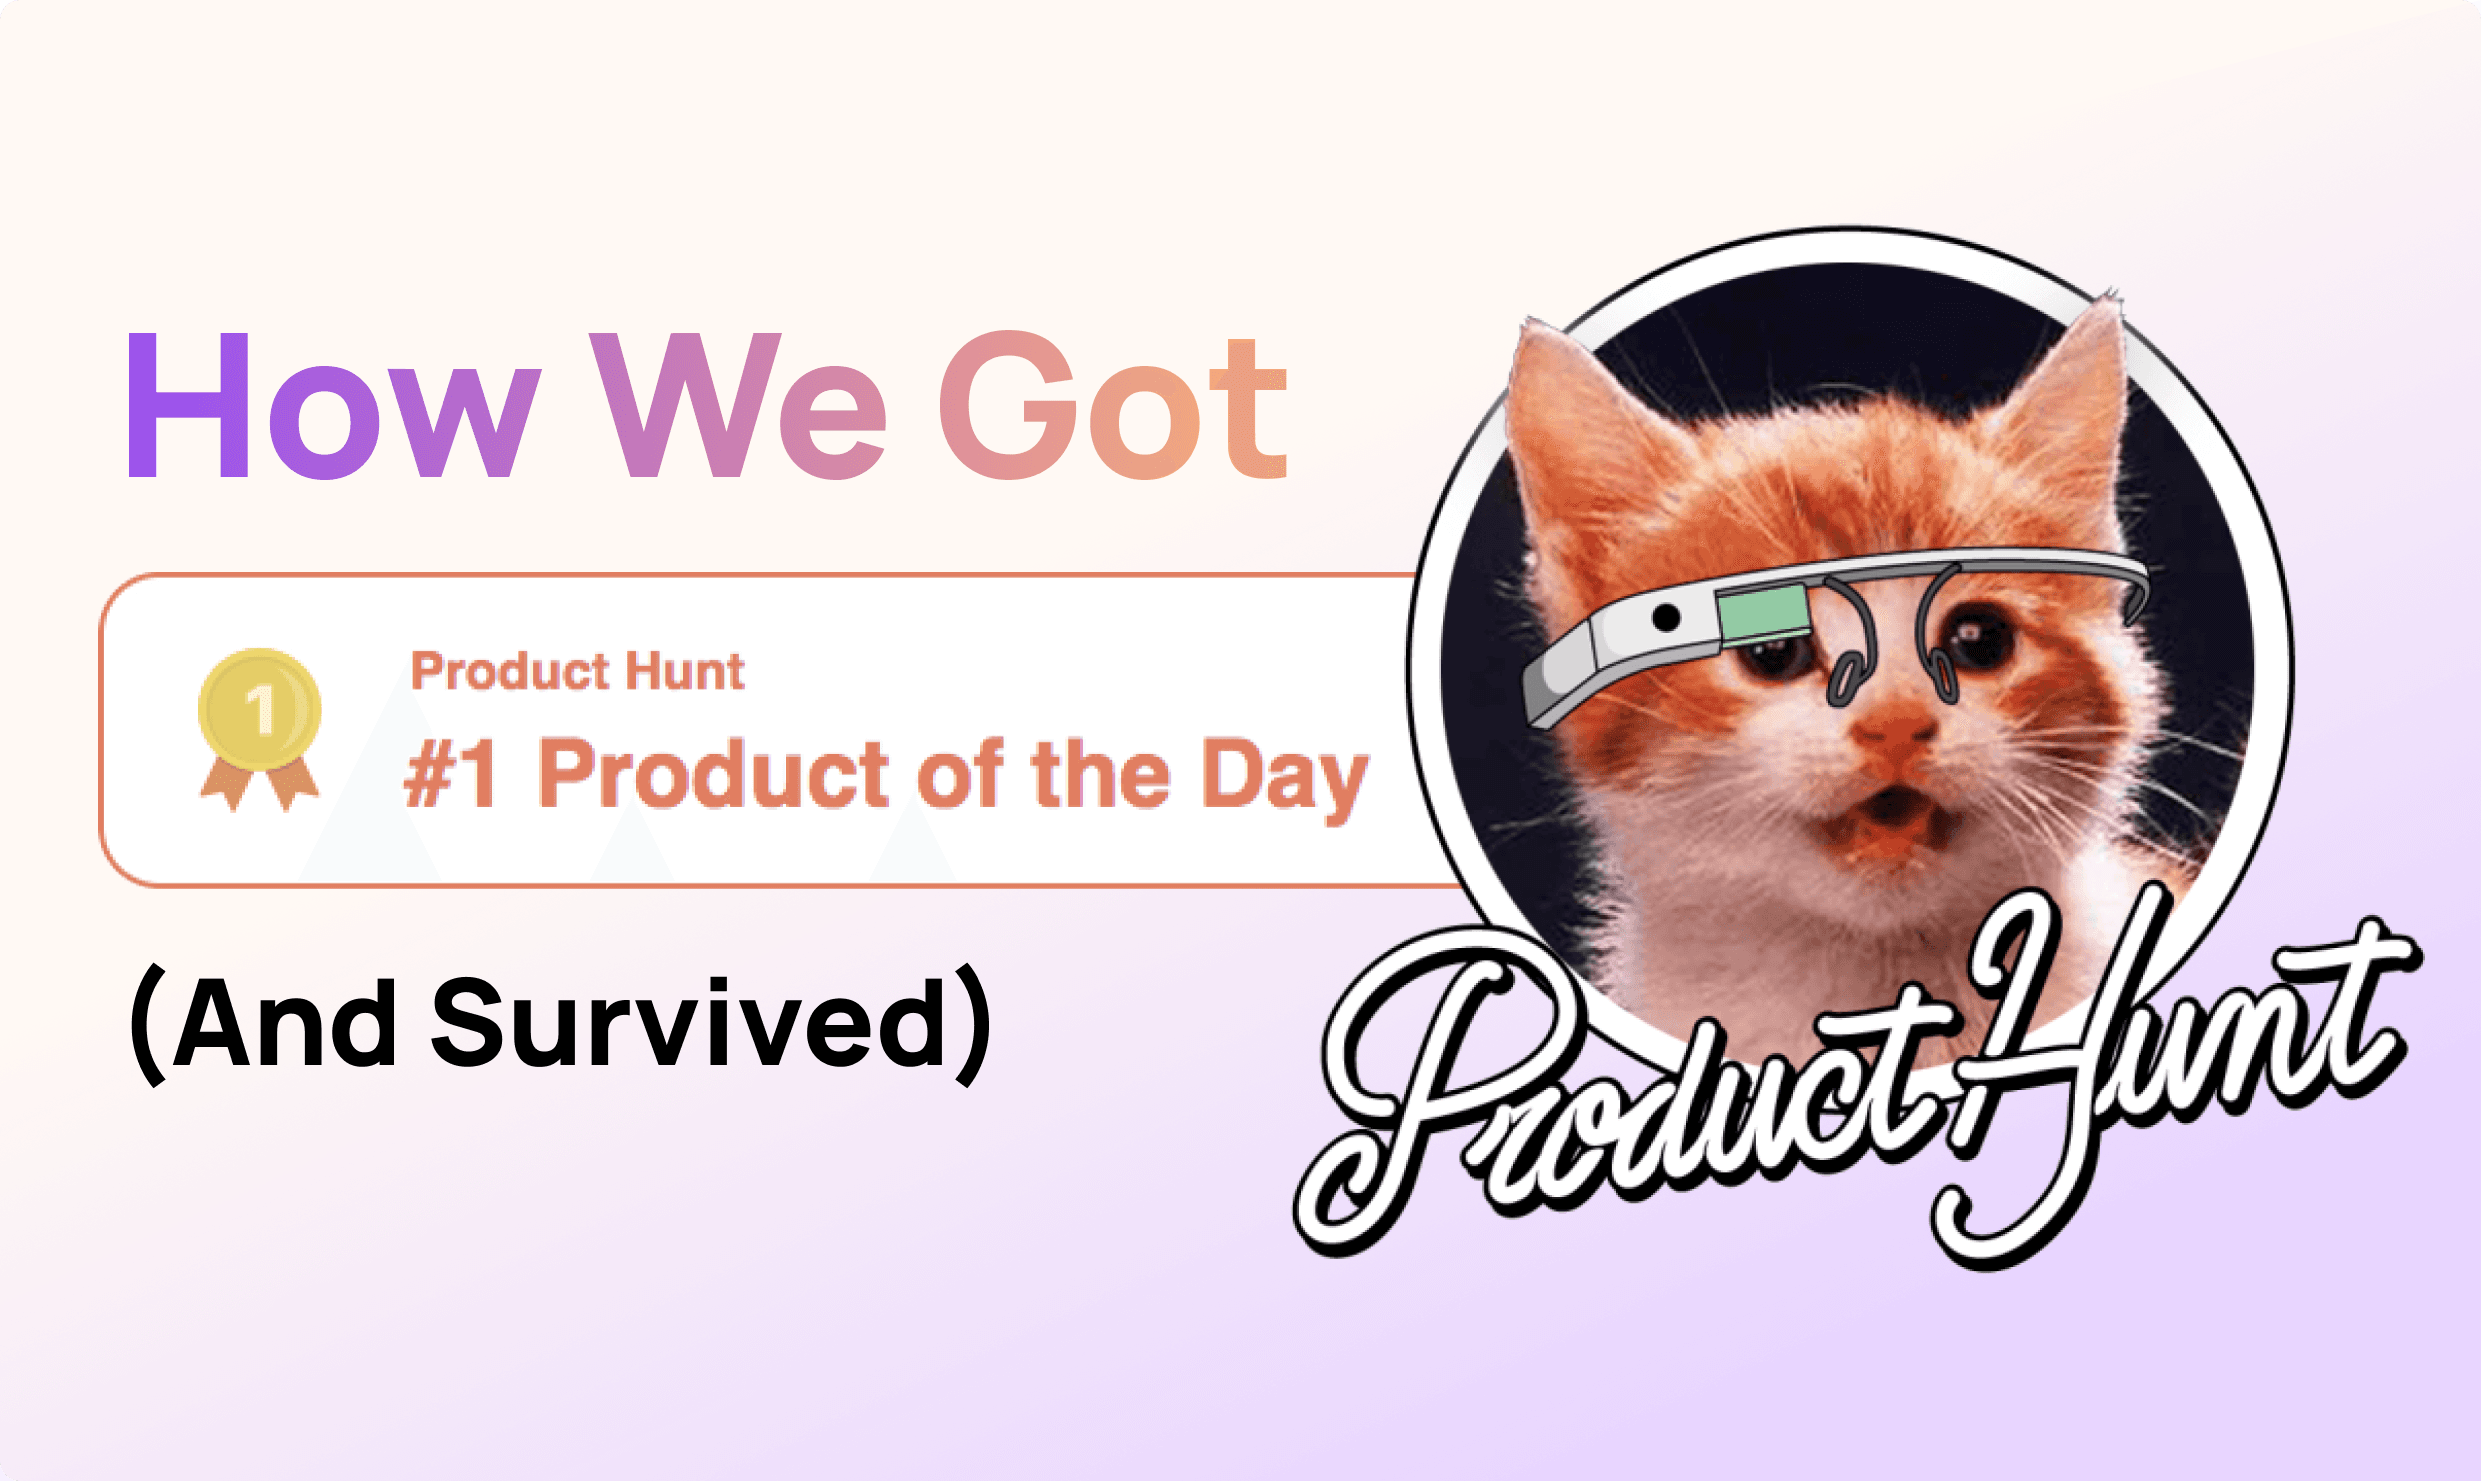 How we got our Dev Tool ‘Product of the Day’ in Product Hunt (And Survived)